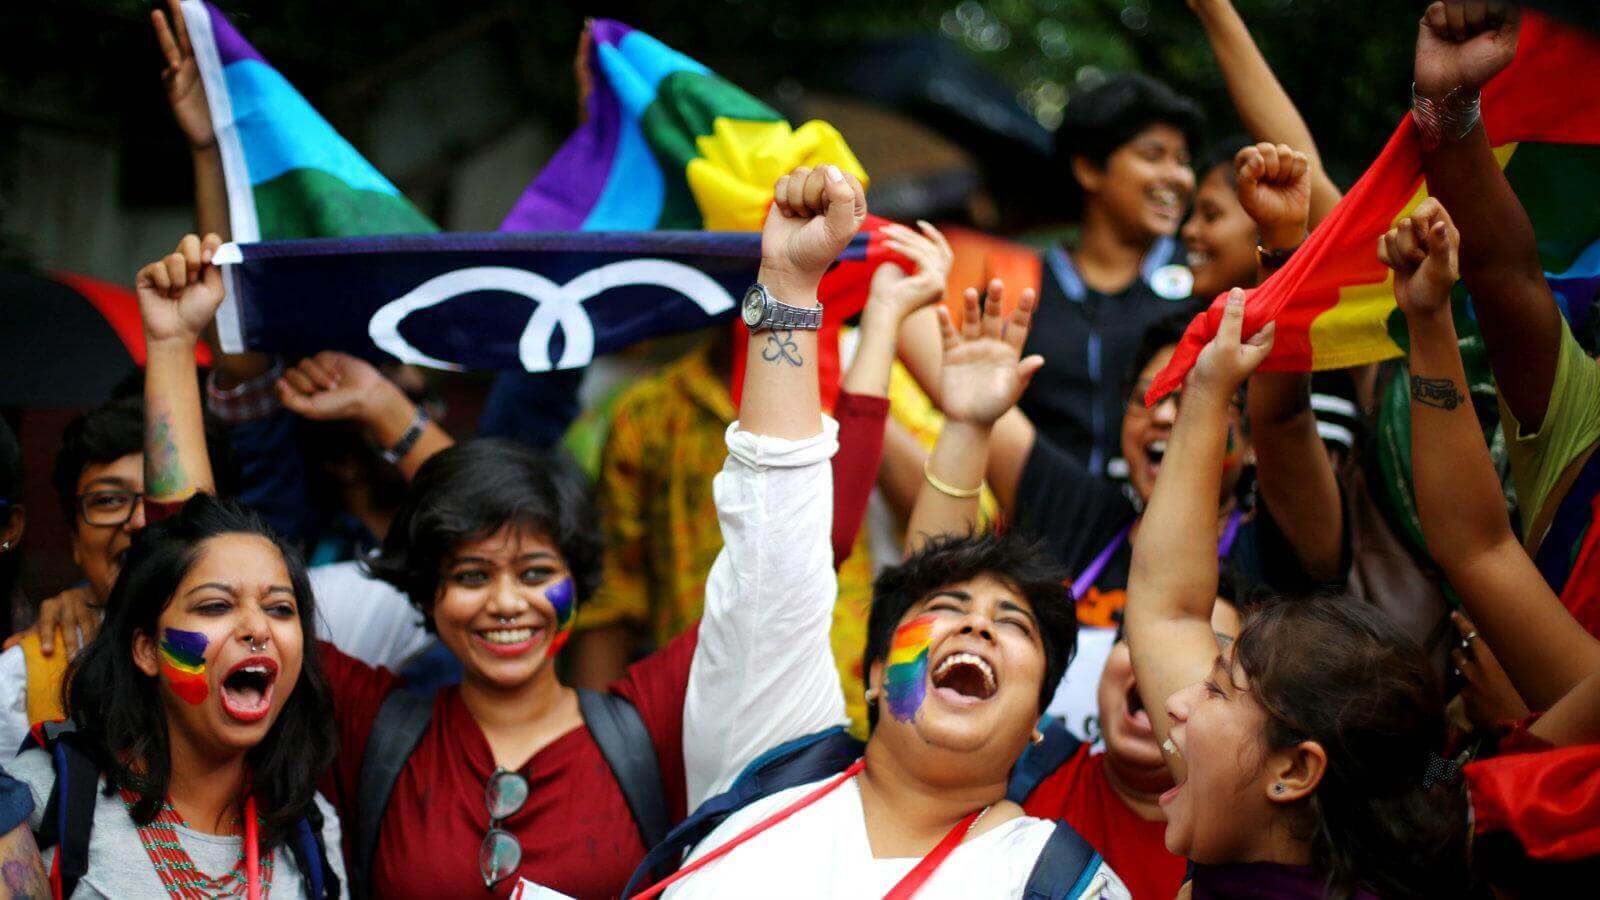 Decriminalization of Section 377: A step towards an Inclusive Society